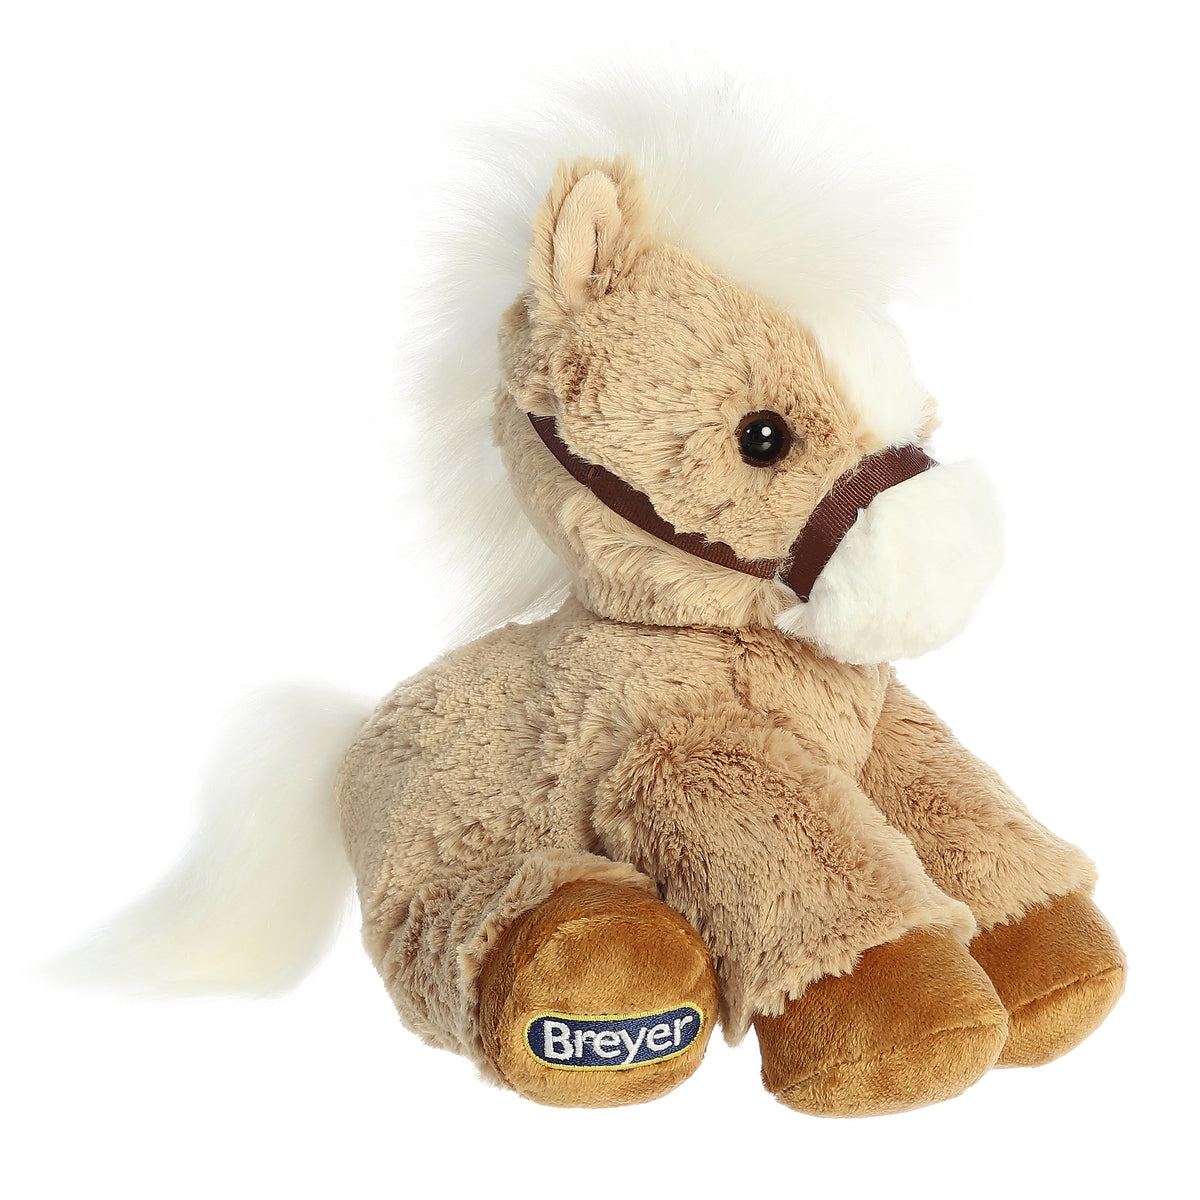 An adorably seated brown and white Breyer Palomino horse plush with a tan coat, a white snout, and brown reigns.